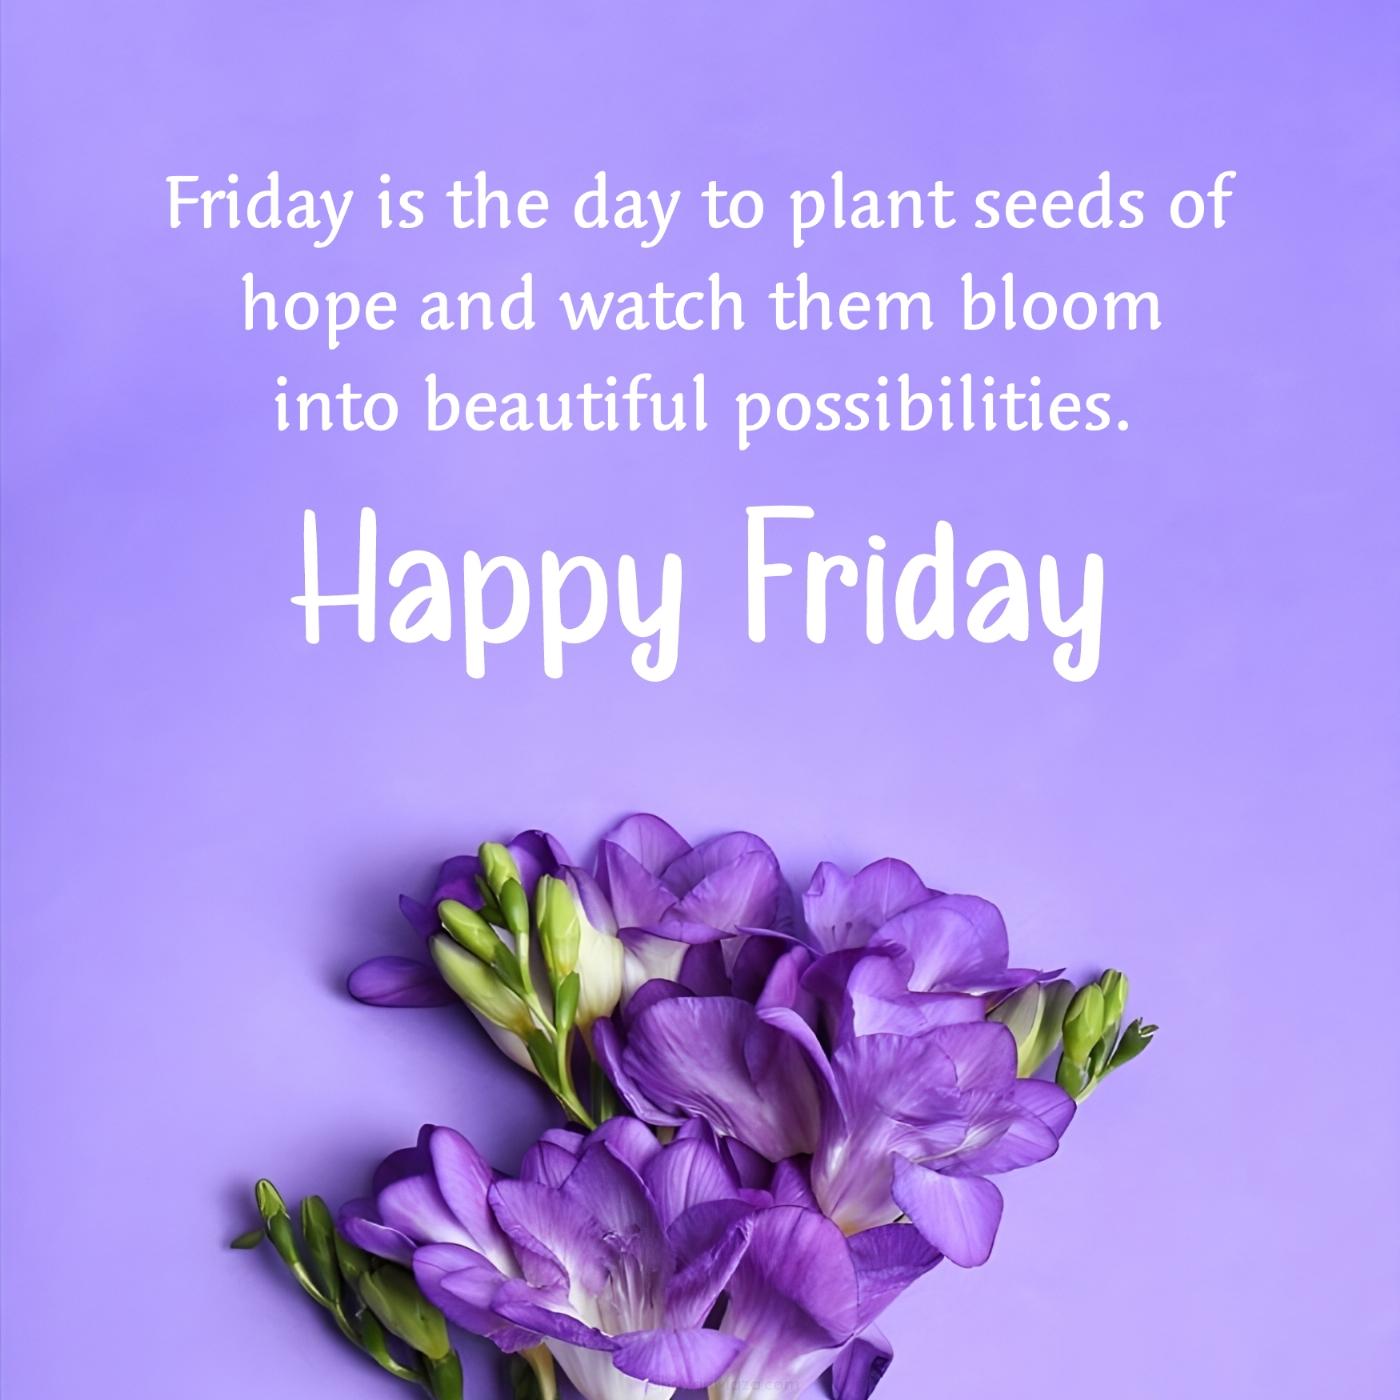 Friday is the day to plant seeds of hope and watch them bloom